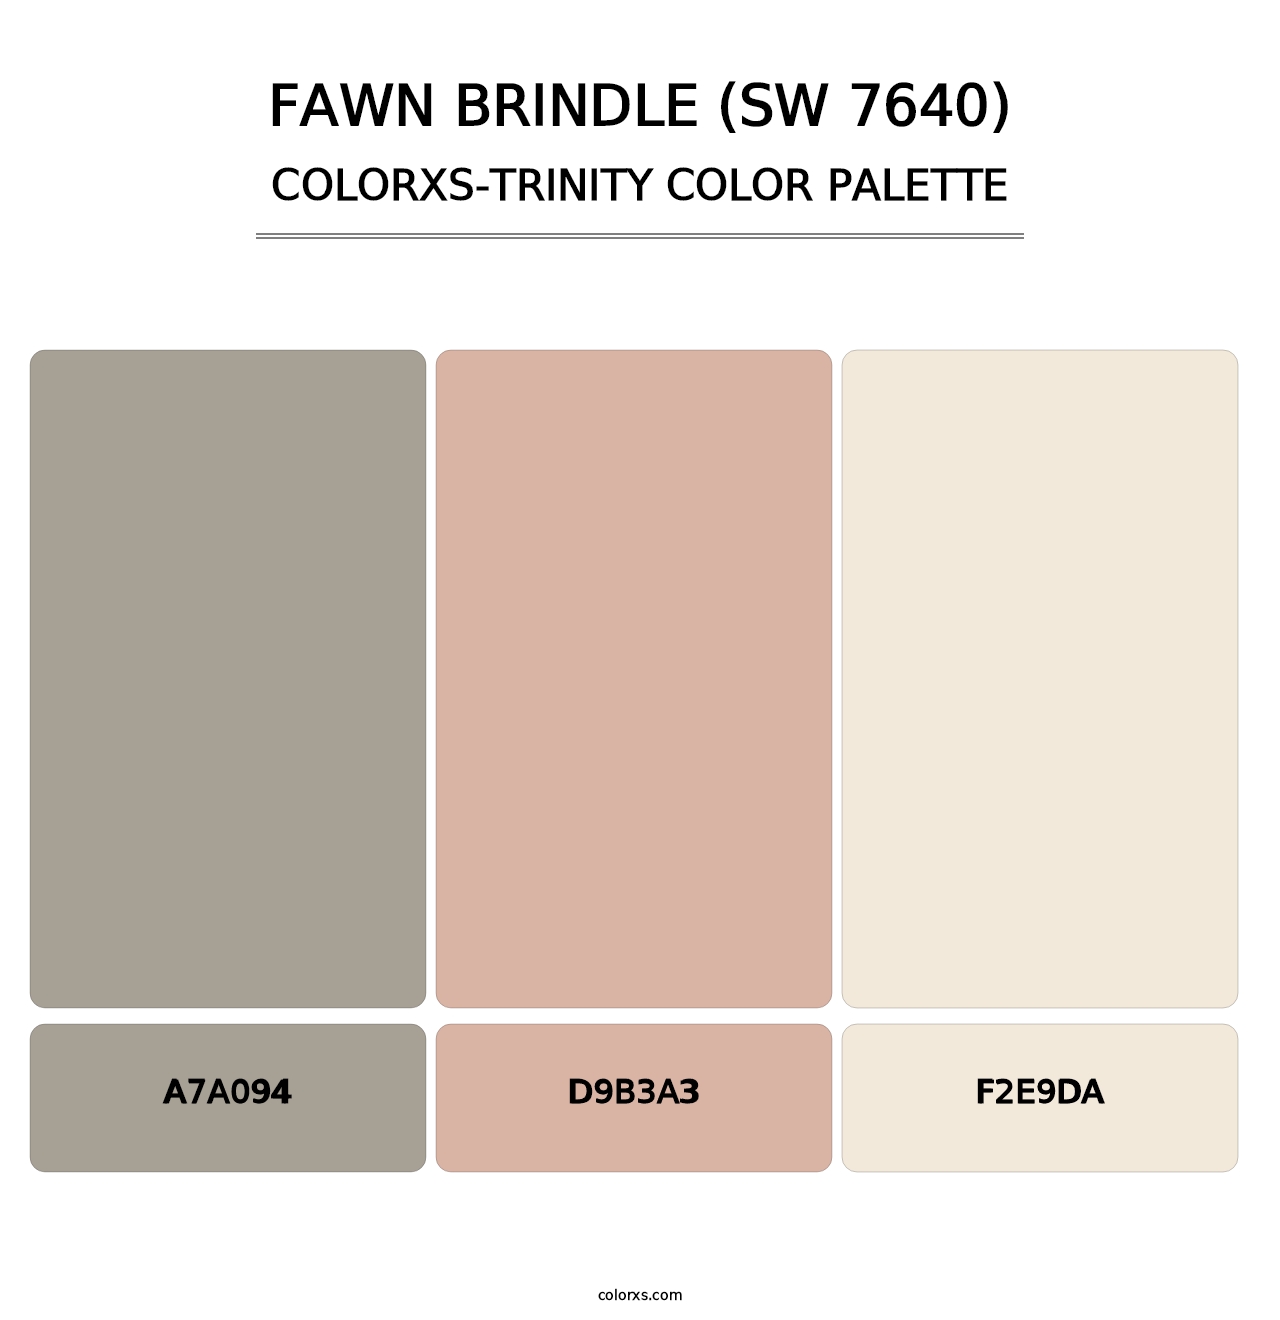 Fawn Brindle (SW 7640) - Colorxs Trinity Palette